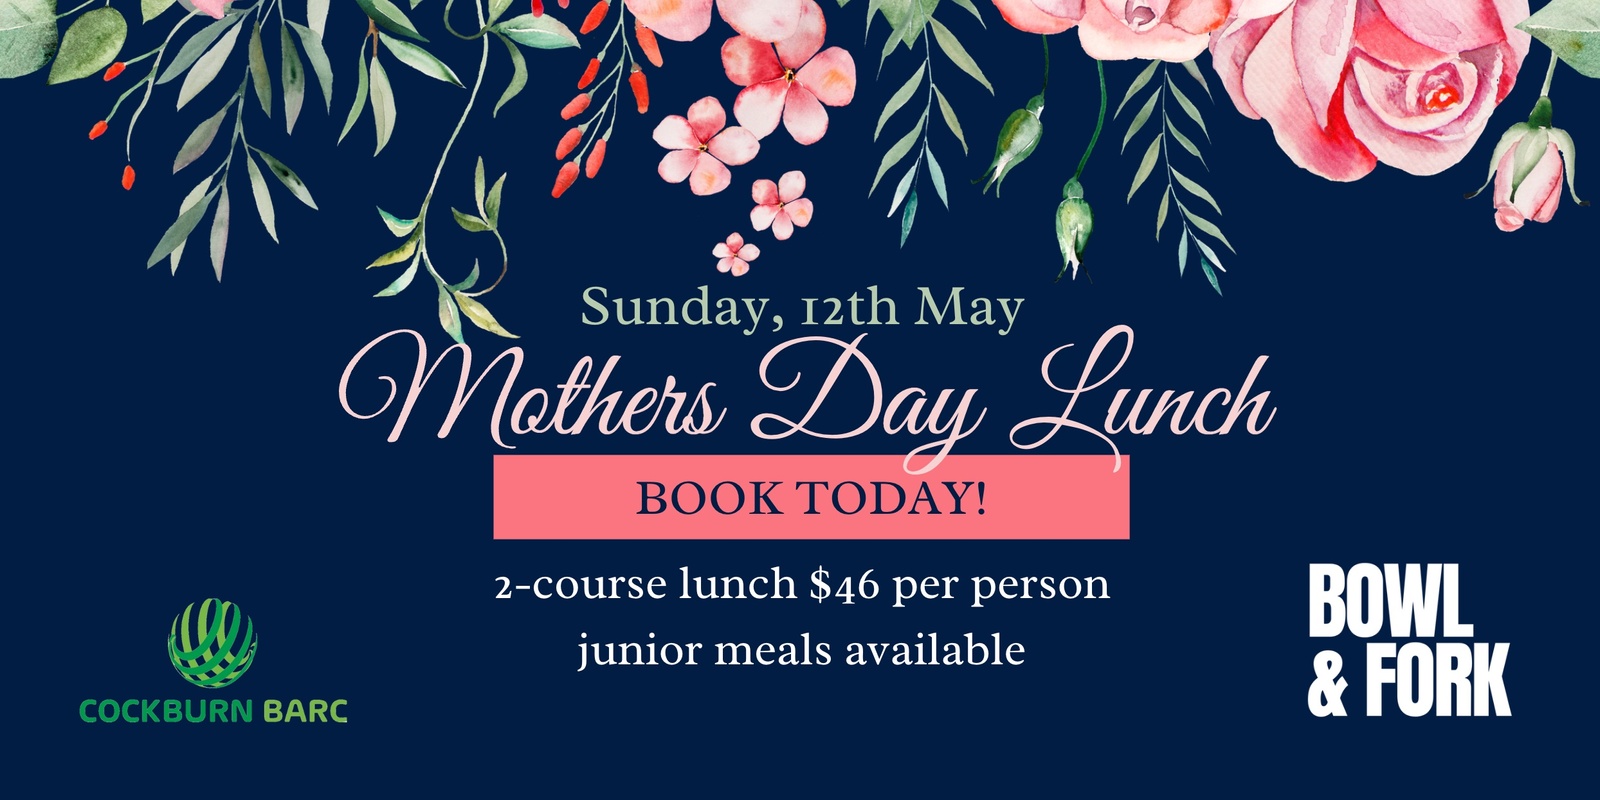 Banner image for Mother's Day Lunch at Bowl & Fork